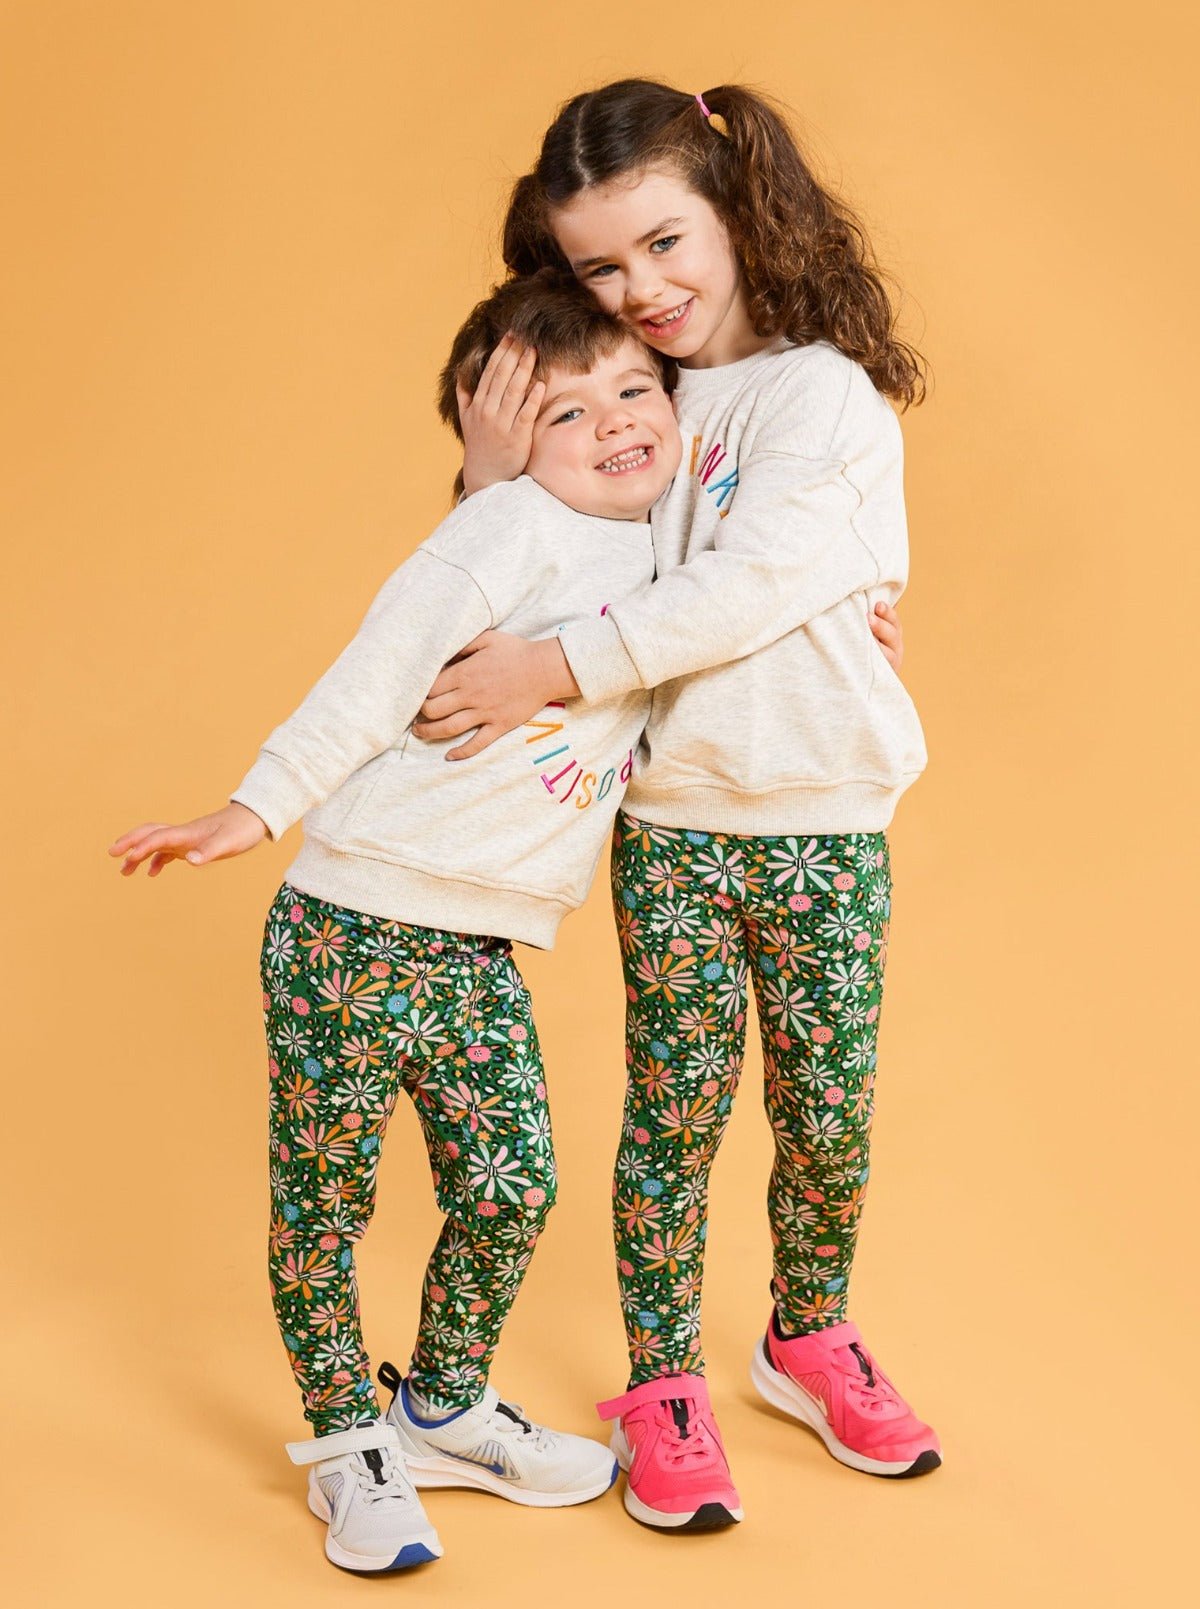 Wild Flower - Bamboo Kids Leggings - brother sister matching outfits